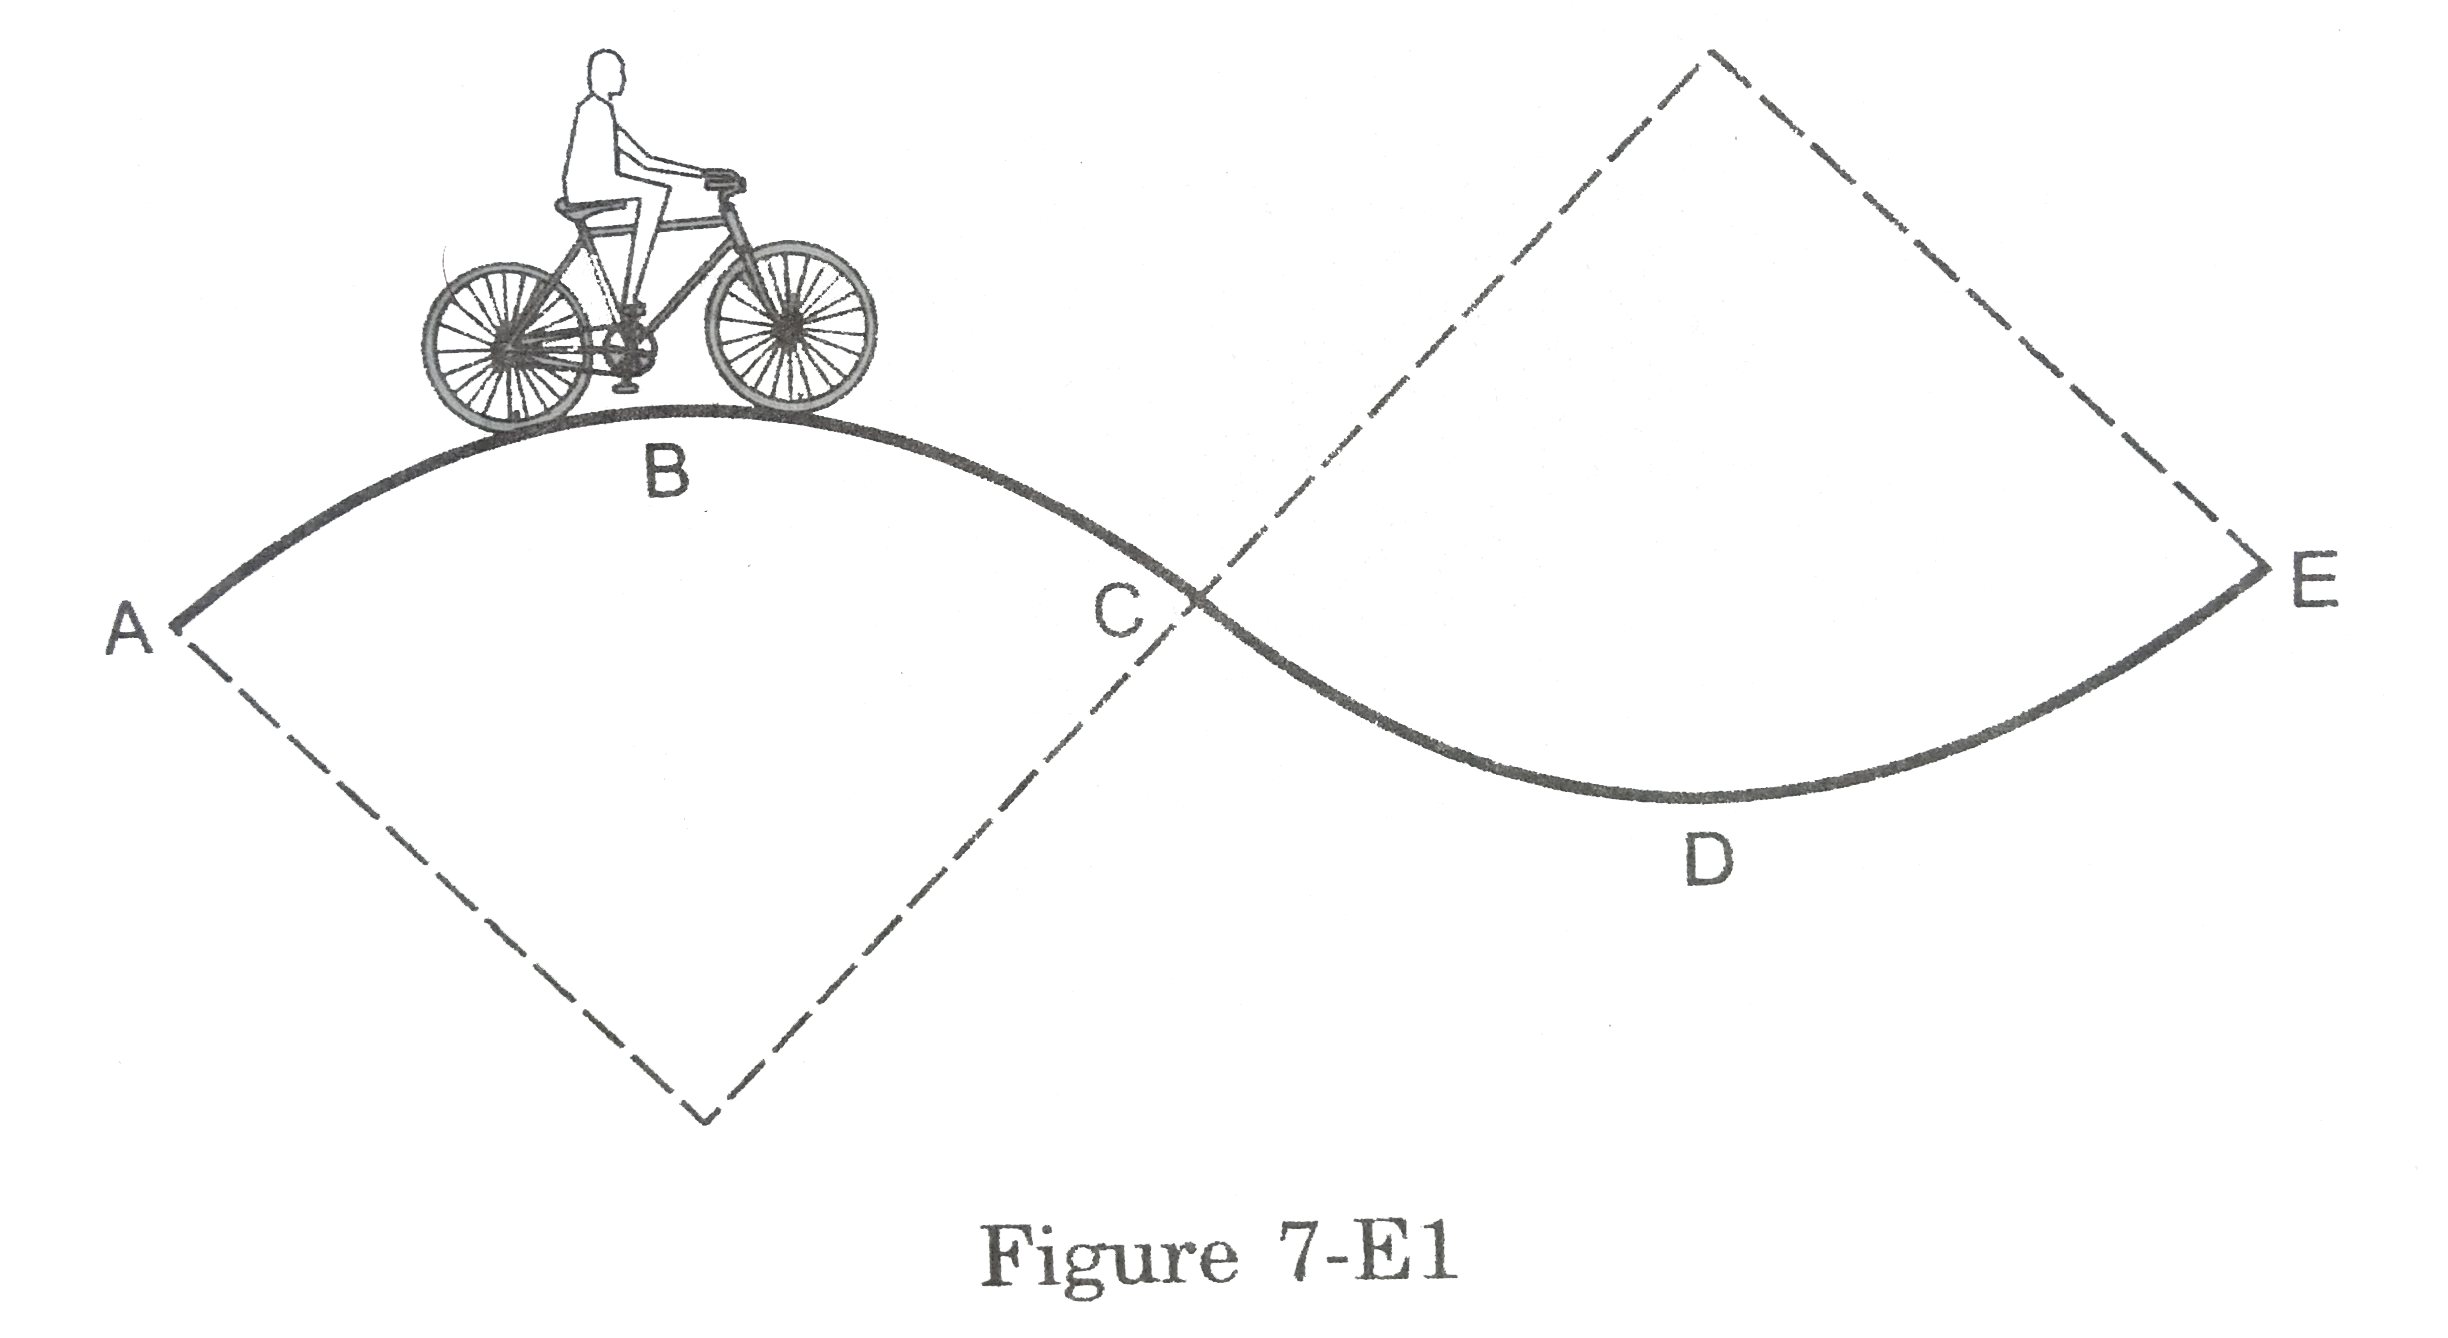 A track consists of two circular pars ABC and CDE of equal radius 100 m and joined smoothly as shown in figure.Each part subtends a right angle at its centre. A cycle weighing 100 kg together with rider travels at a constant speed of 18 km/h on the track. A. Find the normal contact force by the road on the cycle when it is at B and at D. b.Find the force of friction exerted by the track on the tyres when the cycle is at B,C and D. c. Find the normal force between the road and the cycle just before and just after the cycle crosses C. d. What should be the minimum friction coefficient between the road and the tyre, which will ensure that the cyclist can move with constant speed? Take g=10 m/s^2